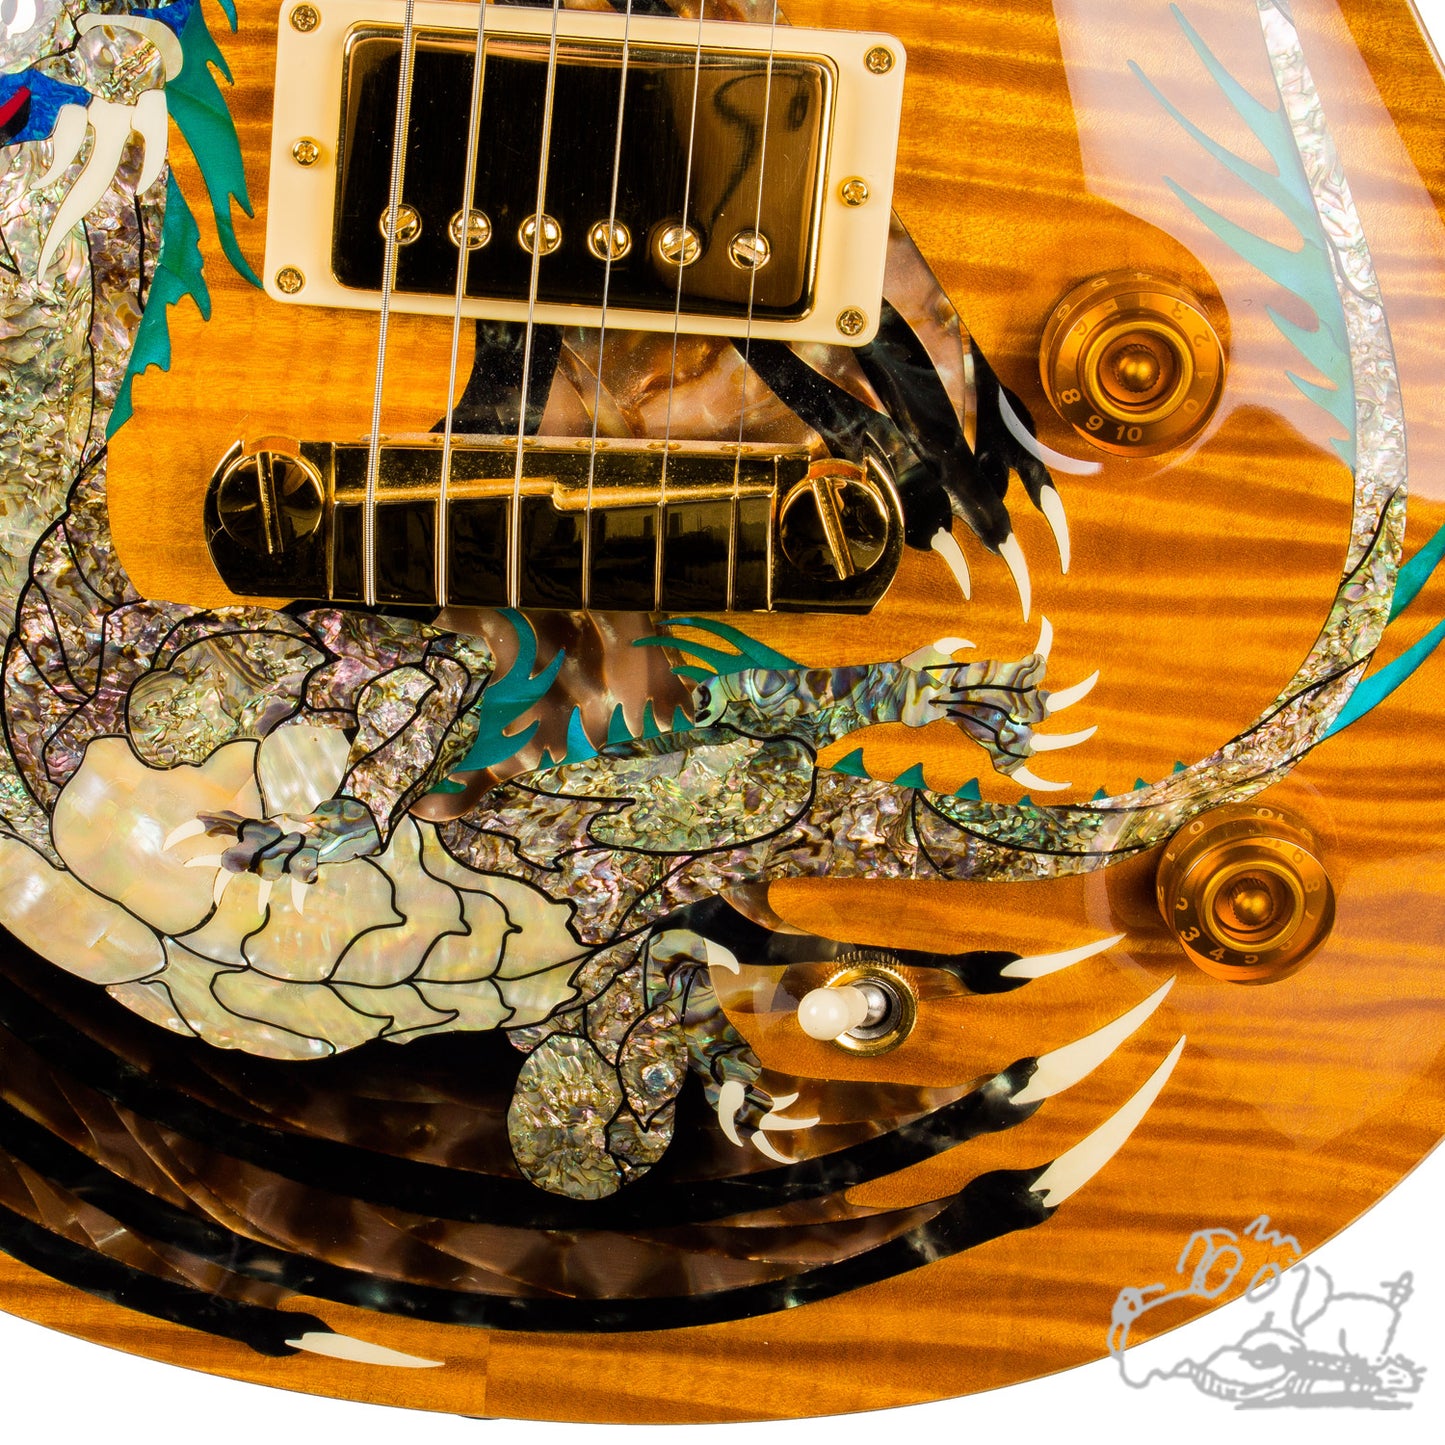 1999 PRS Dragon 2000 - #30 - Finished in Violin Amber